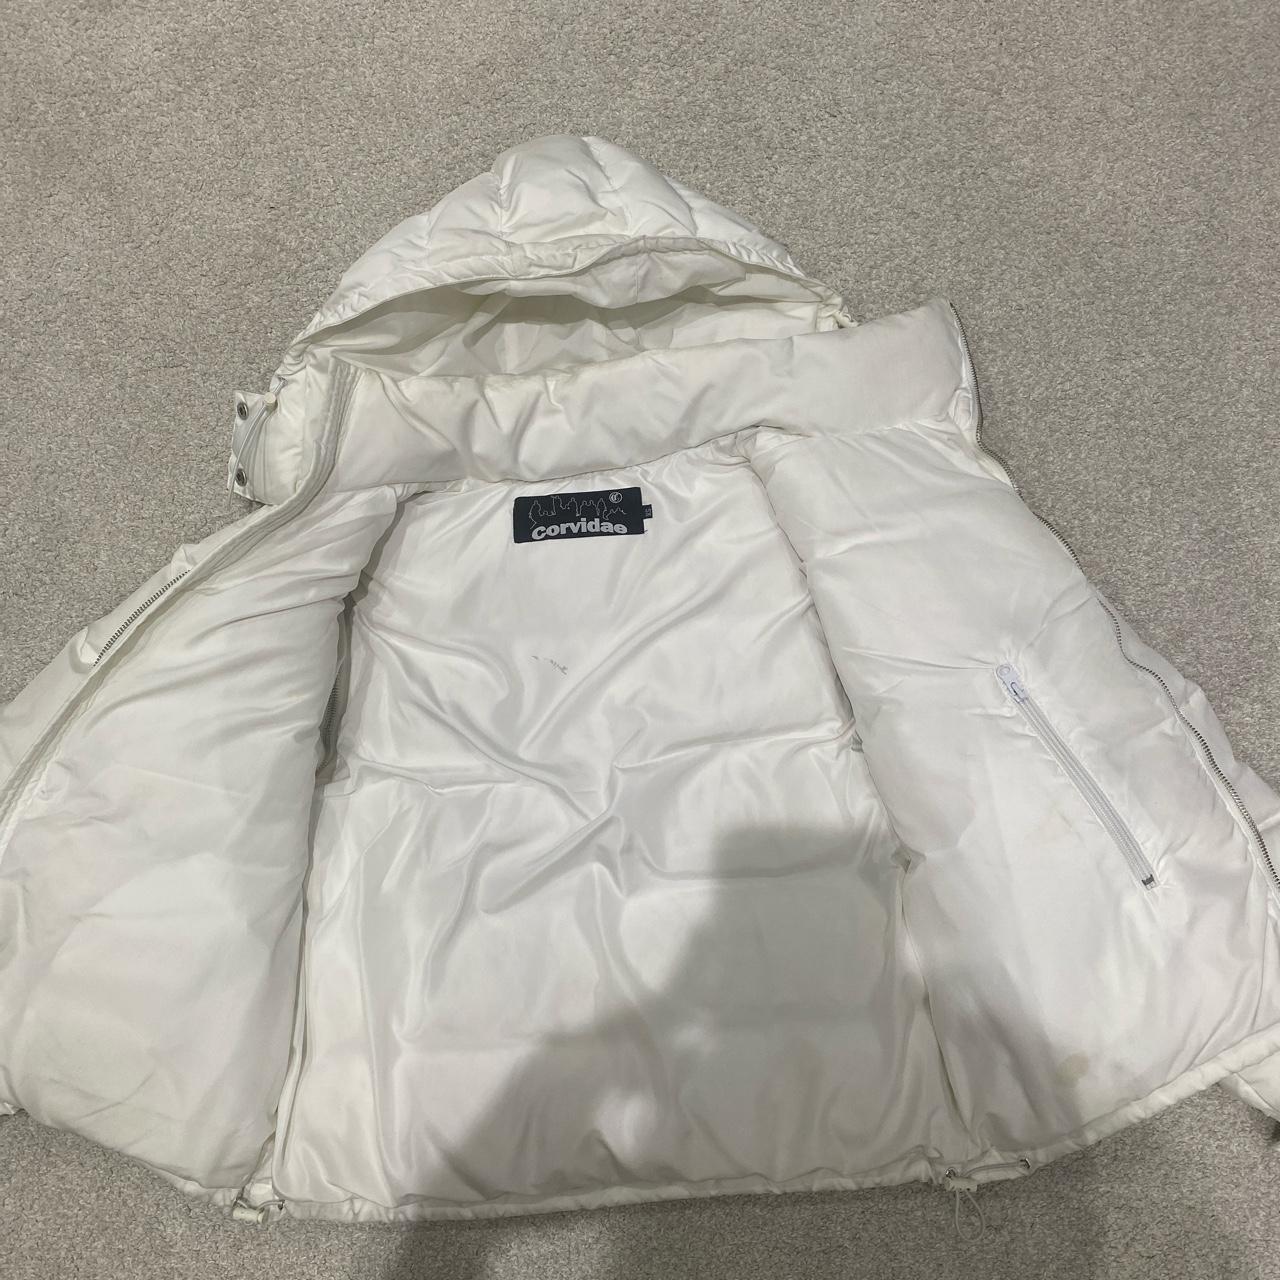 Corvidae puffer jacket. Great condition apart from a... - Depop